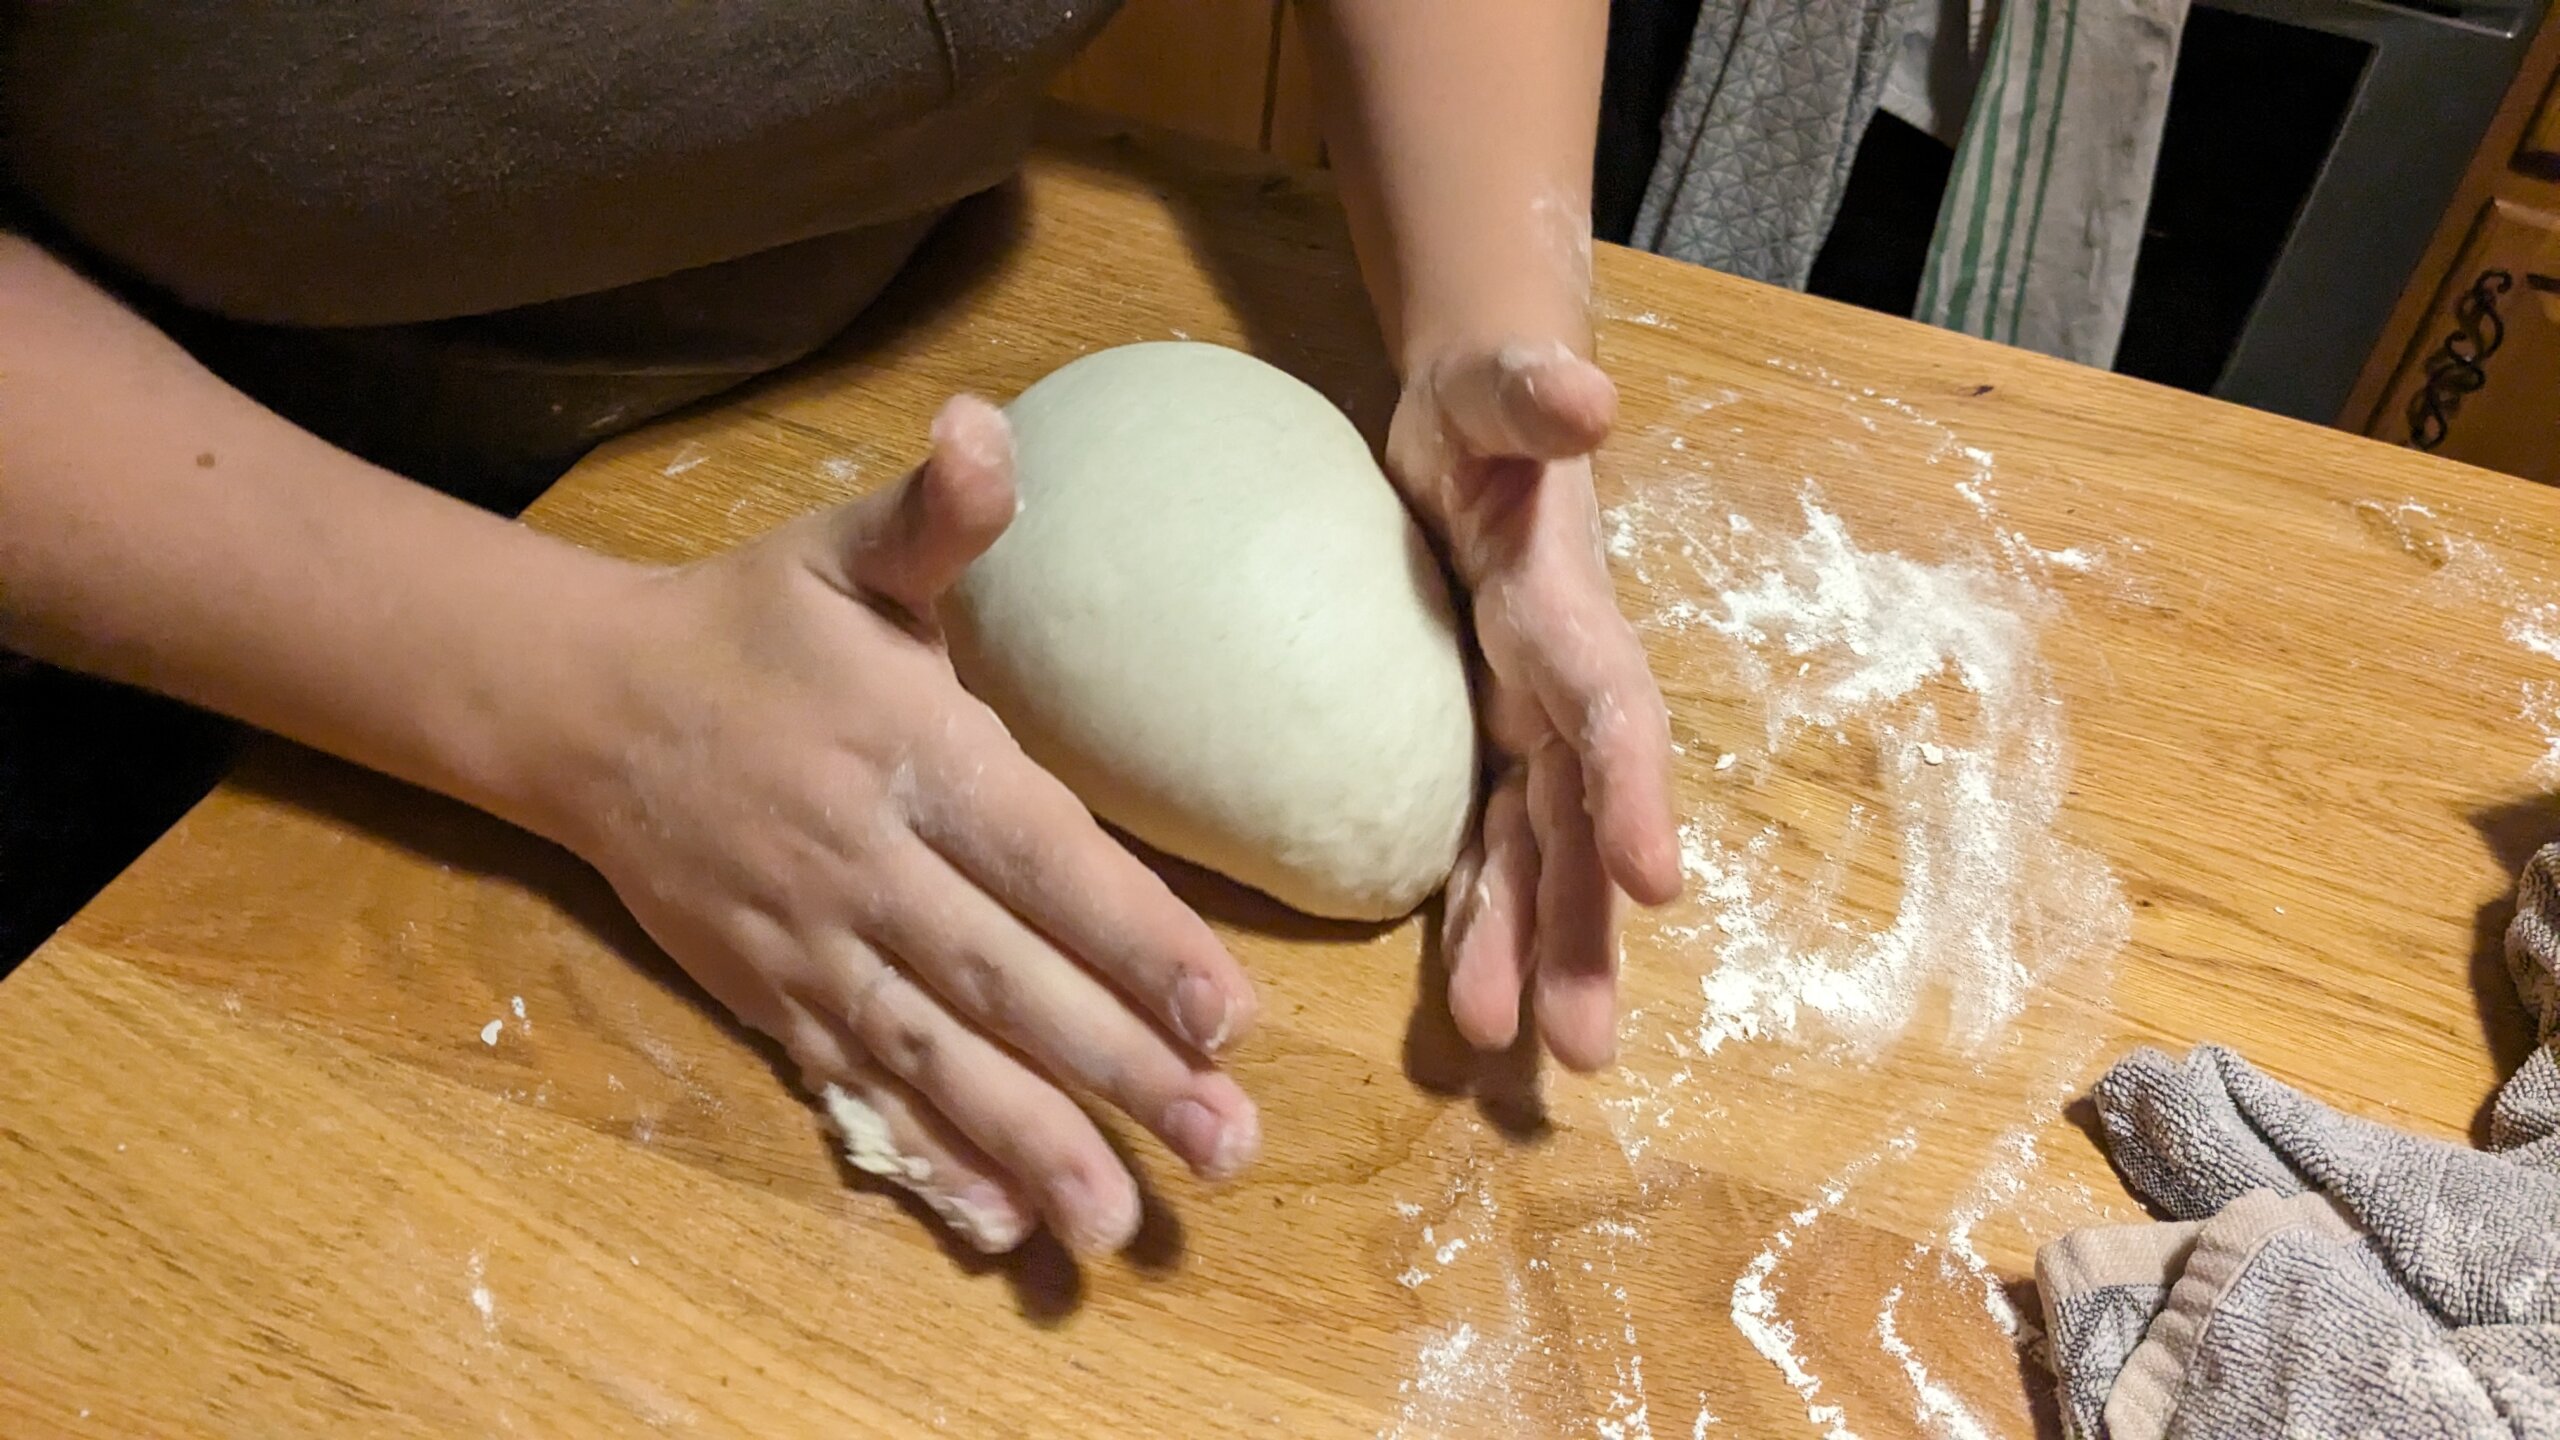 woman pushing a ball of dough into a loaf shape